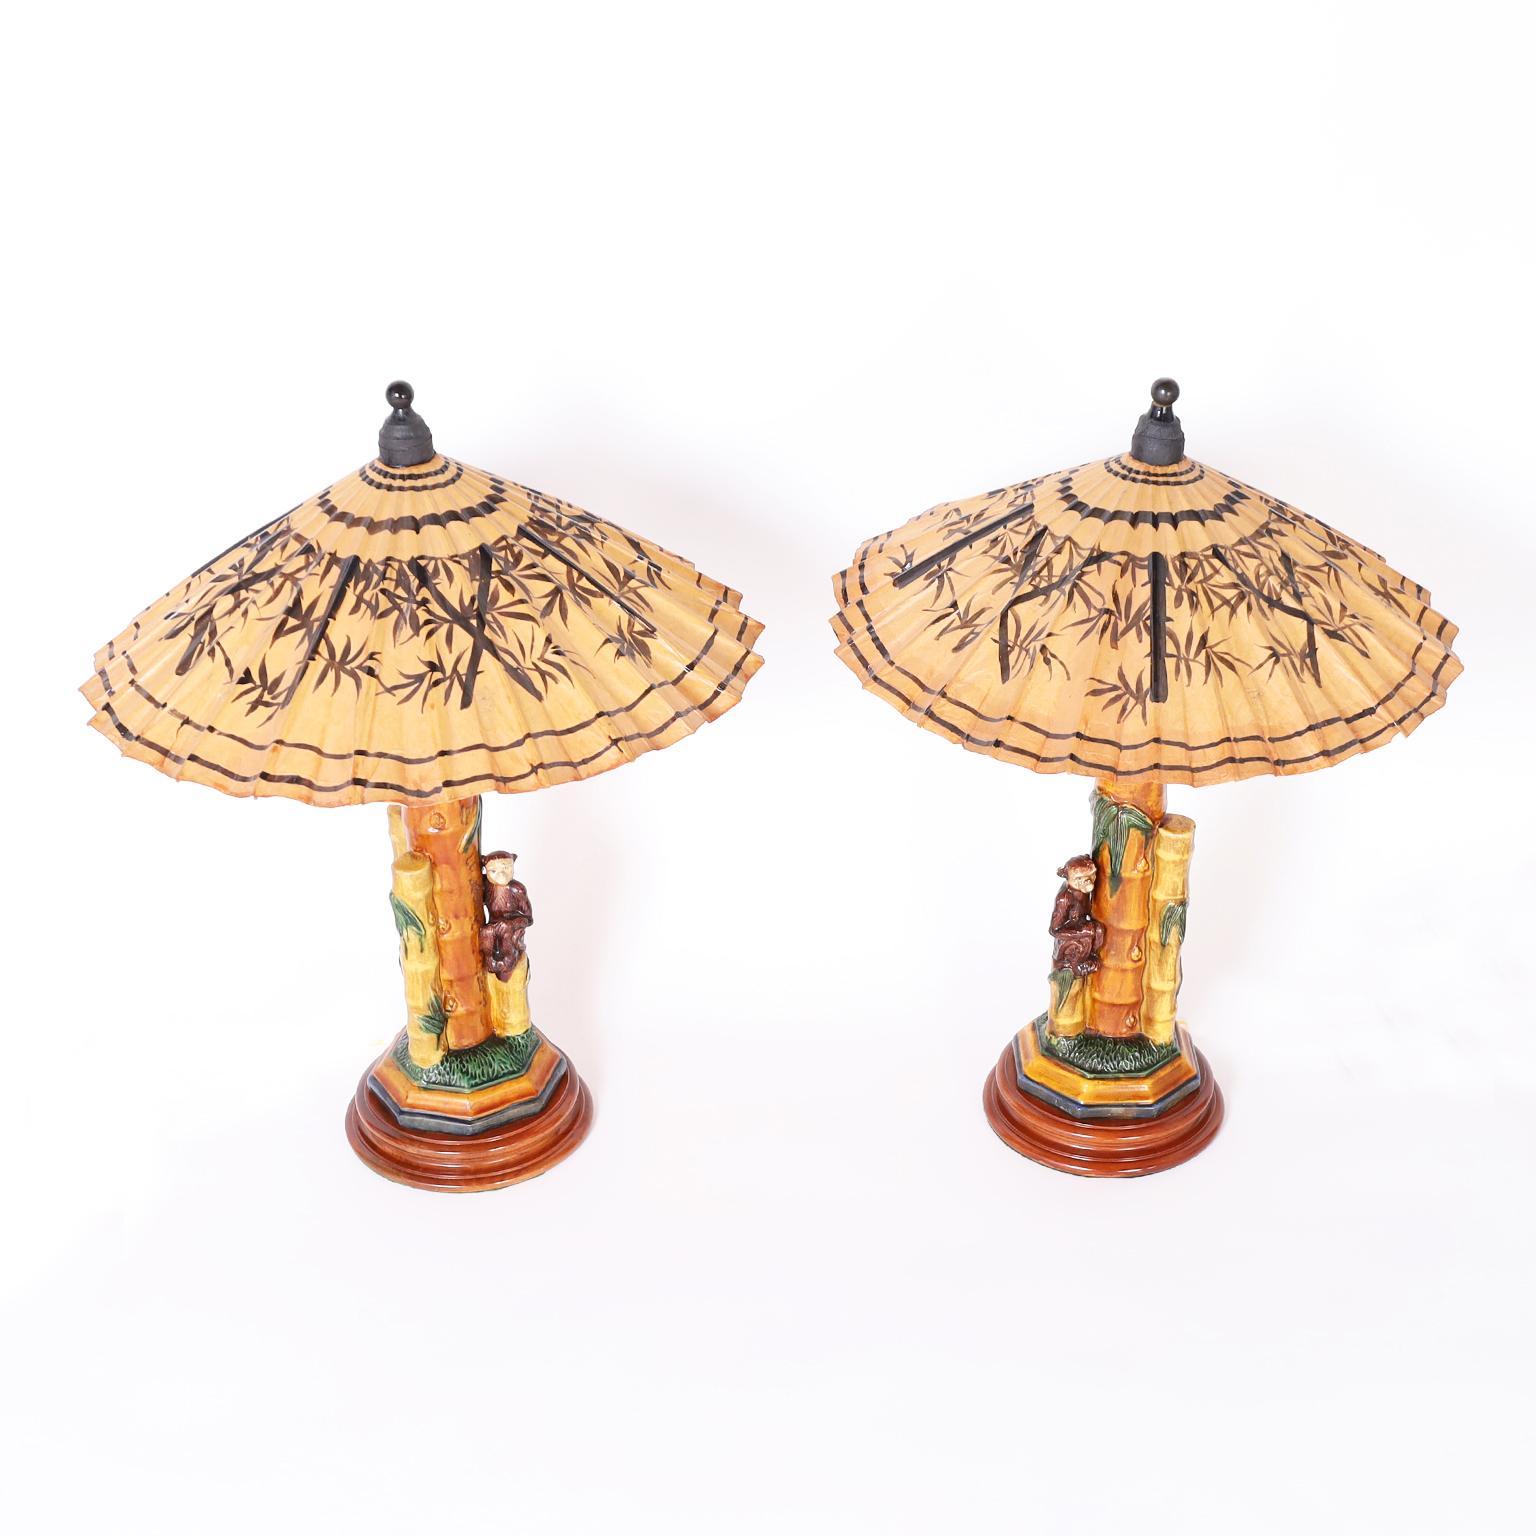 Pair of vintage Chinese table lamps with paper umbrella shades hand decorated and varnished over porcelain bamboo plants with monkeys on turned wood bases.